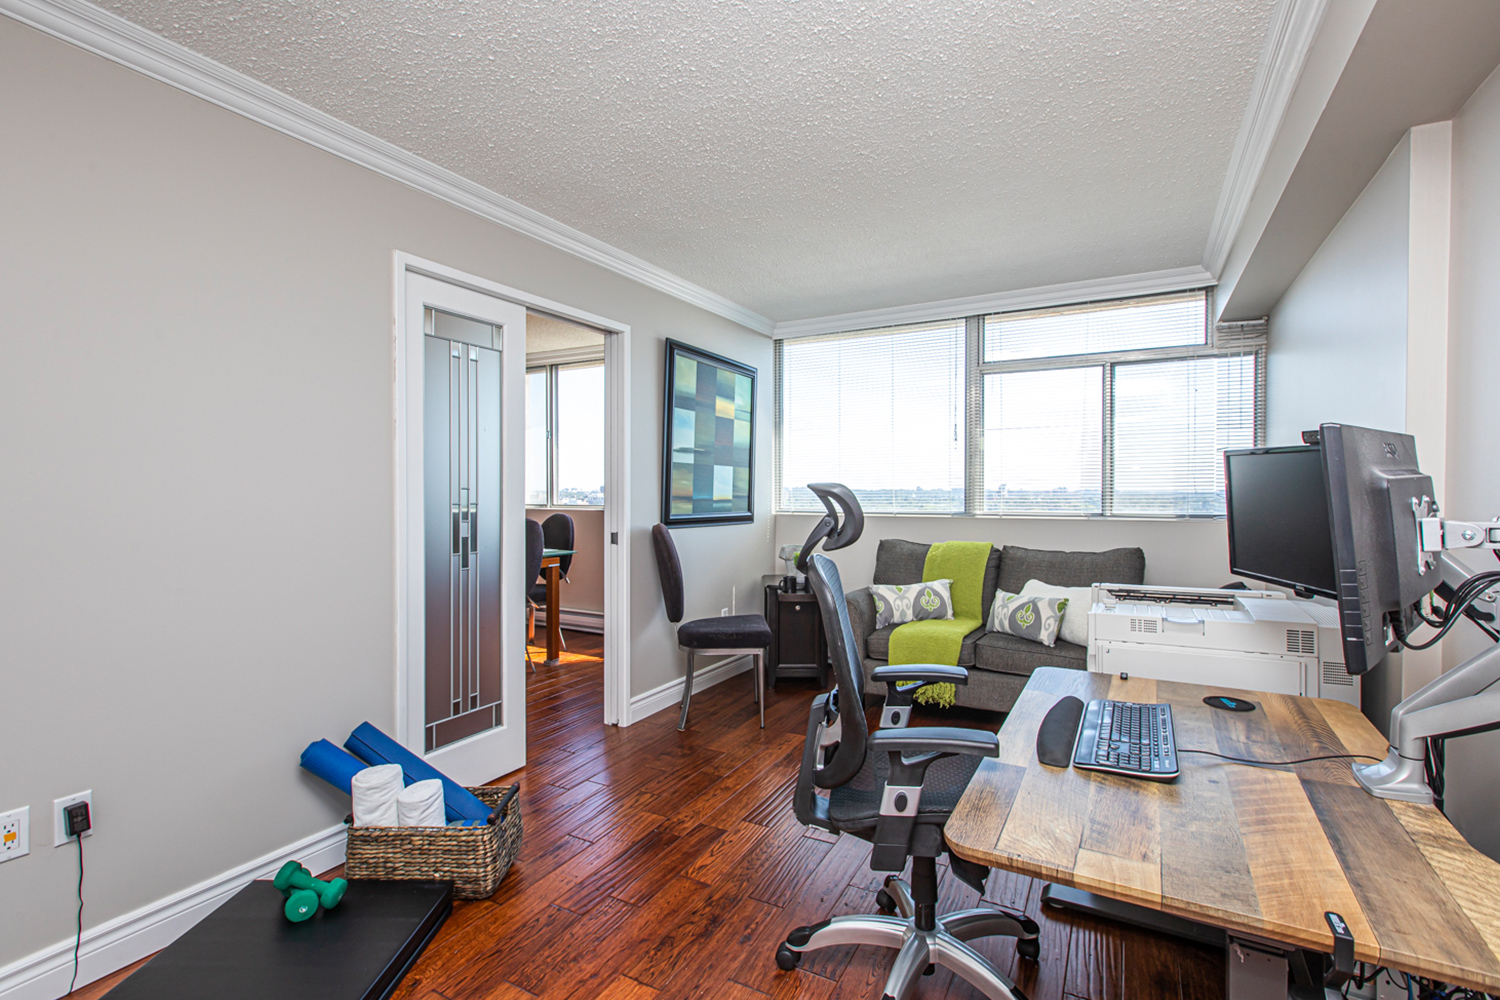 Listing__1530-530-Laurier-Ave-W__11